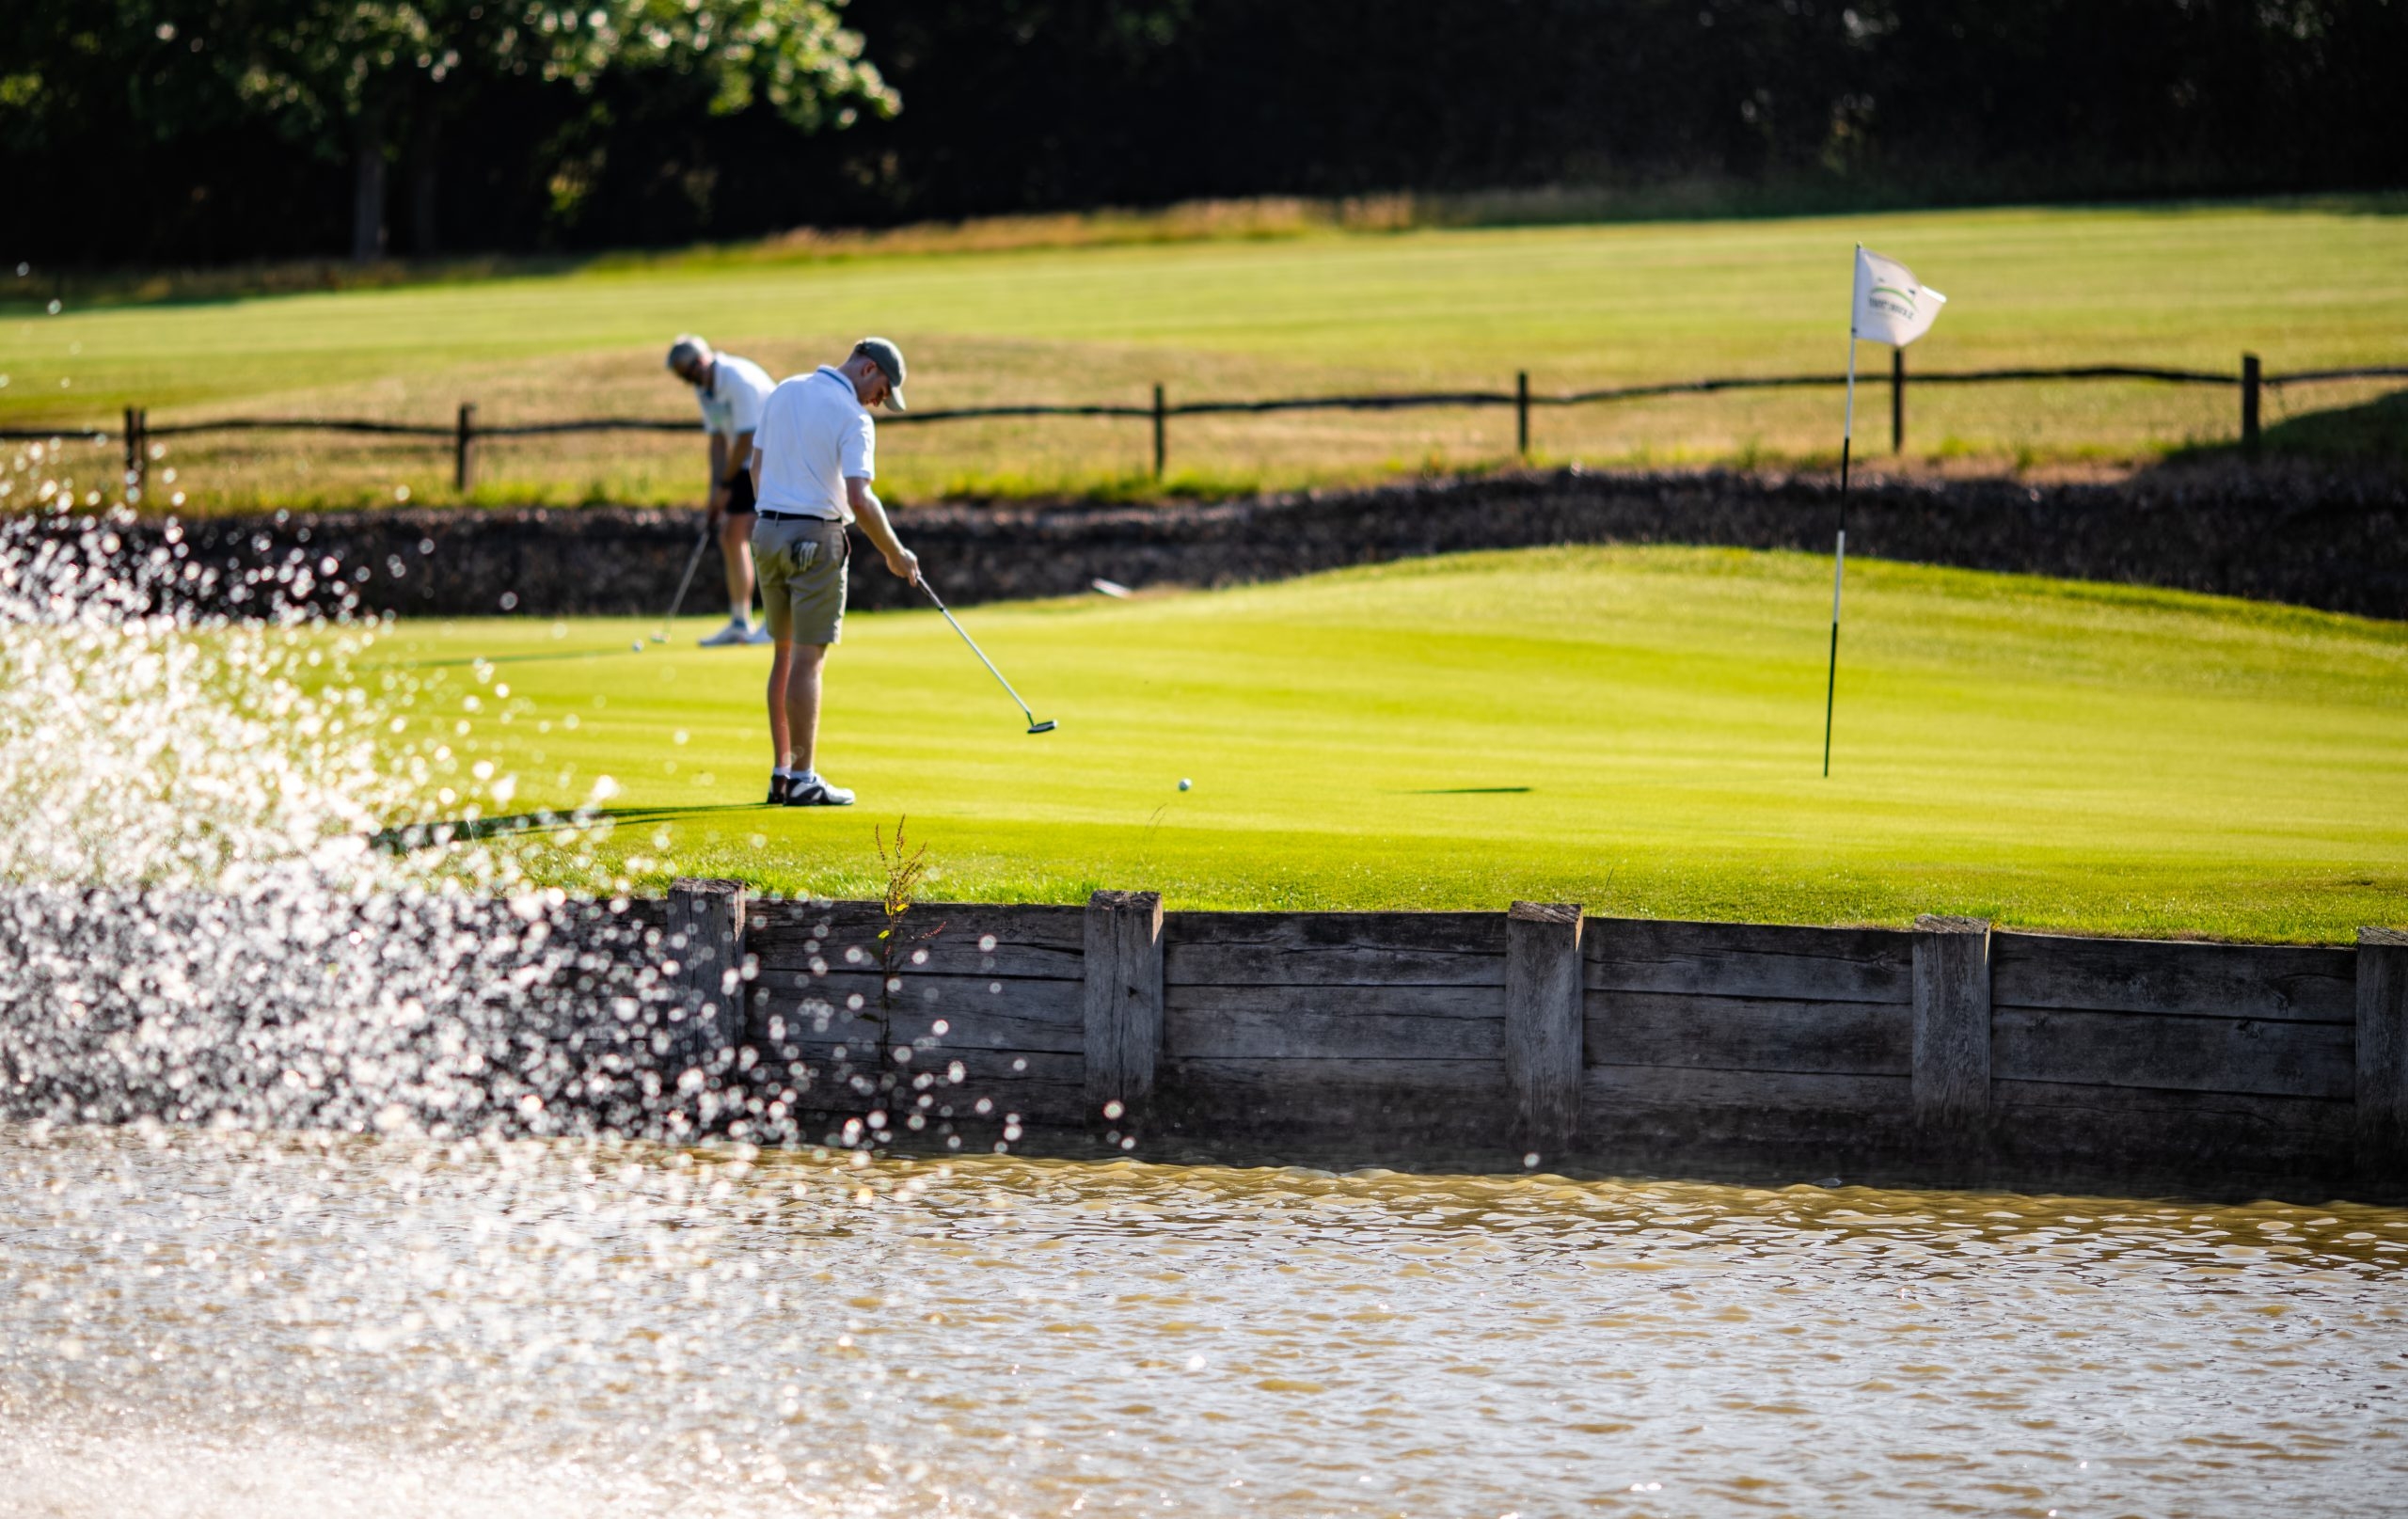 Golfers on green next to water feature on a sunny day on Toot Hill golf course